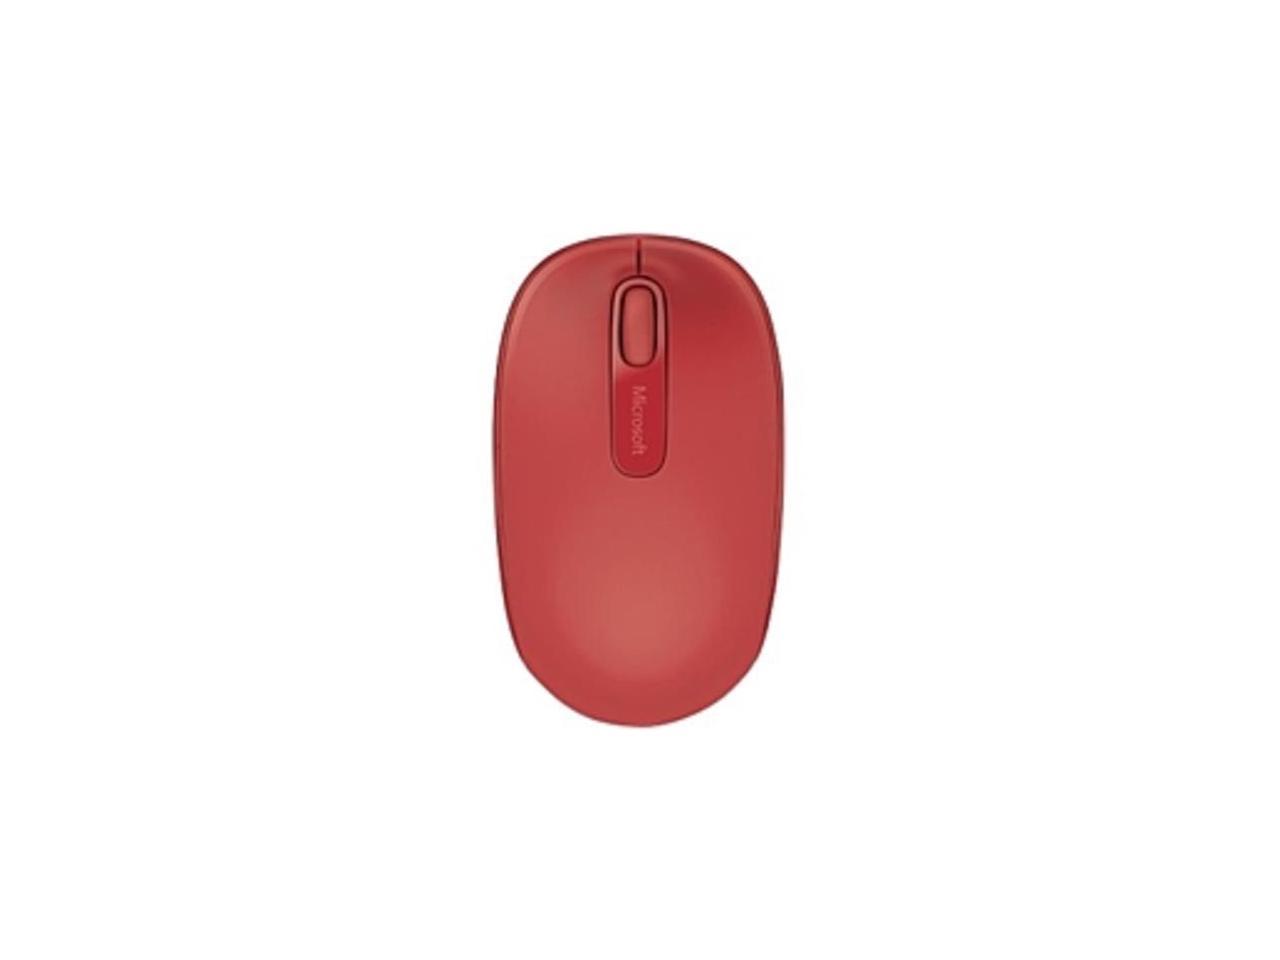 Microsoft Wireless Mobile Mouse 1850 - Flame Red (U7Z-00031) - image 3 of 20